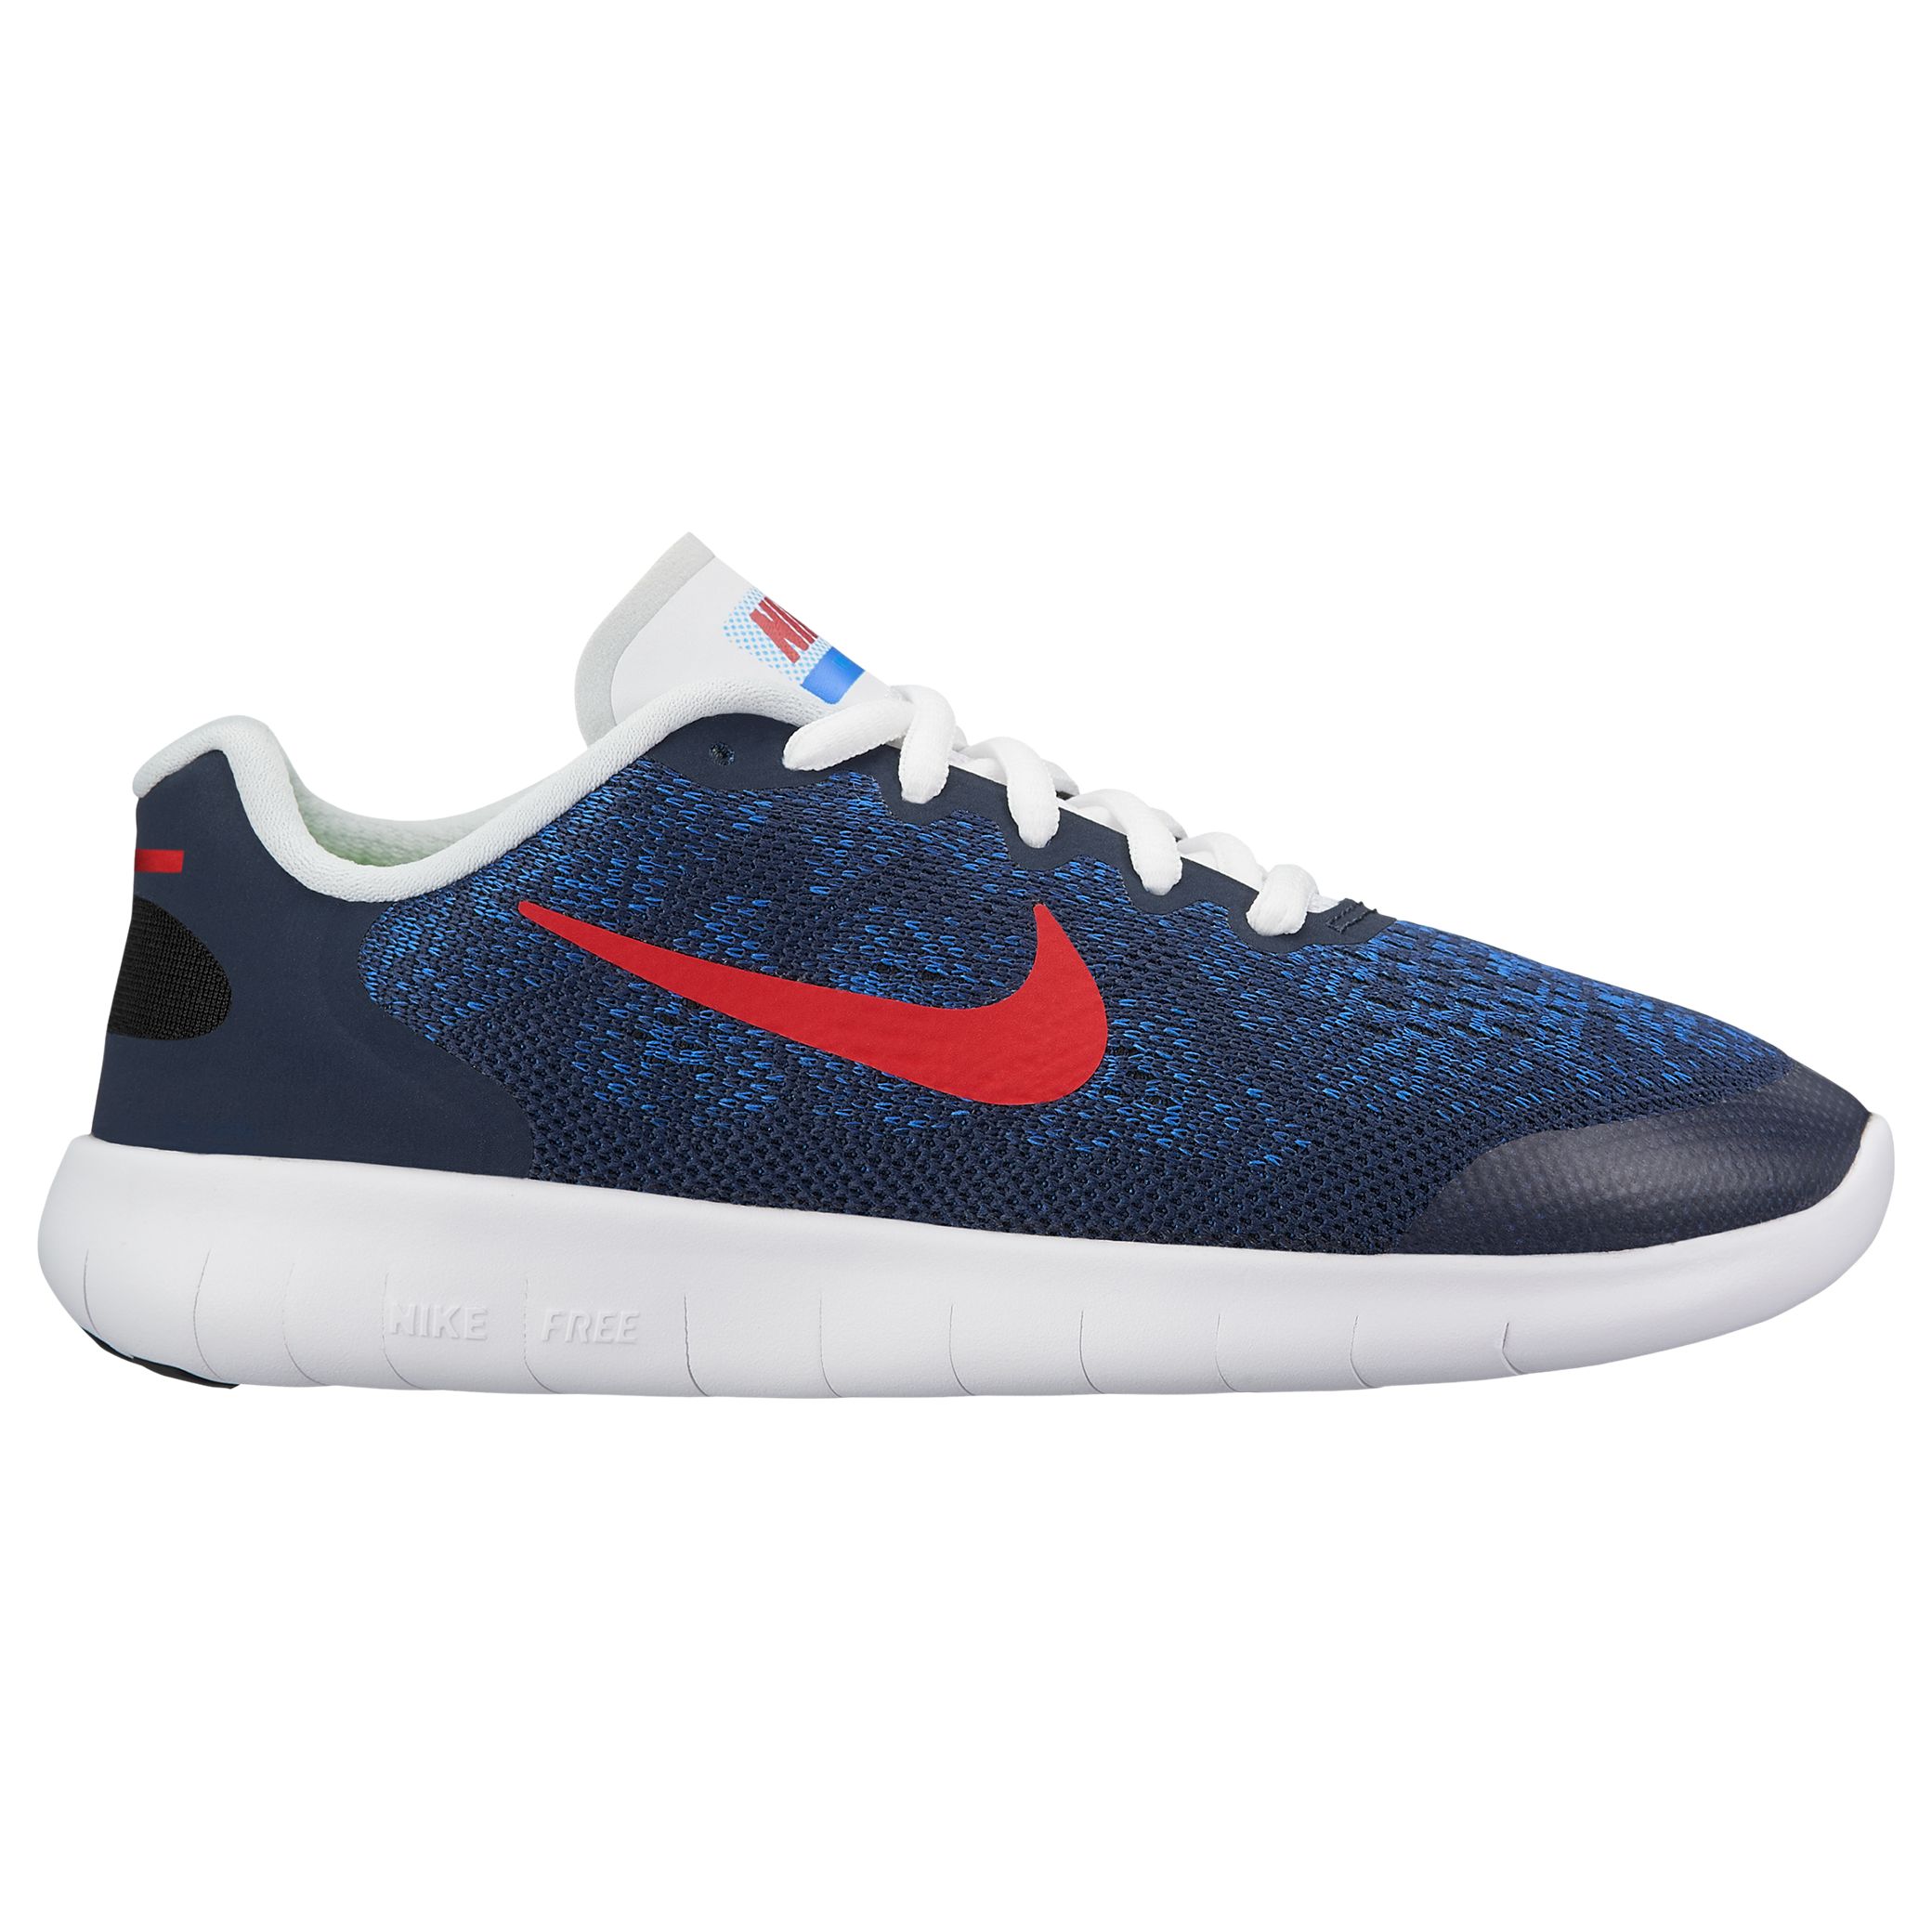 Nike Children's Free RN 2017 (GS) Trainers, Navy/Red, 4